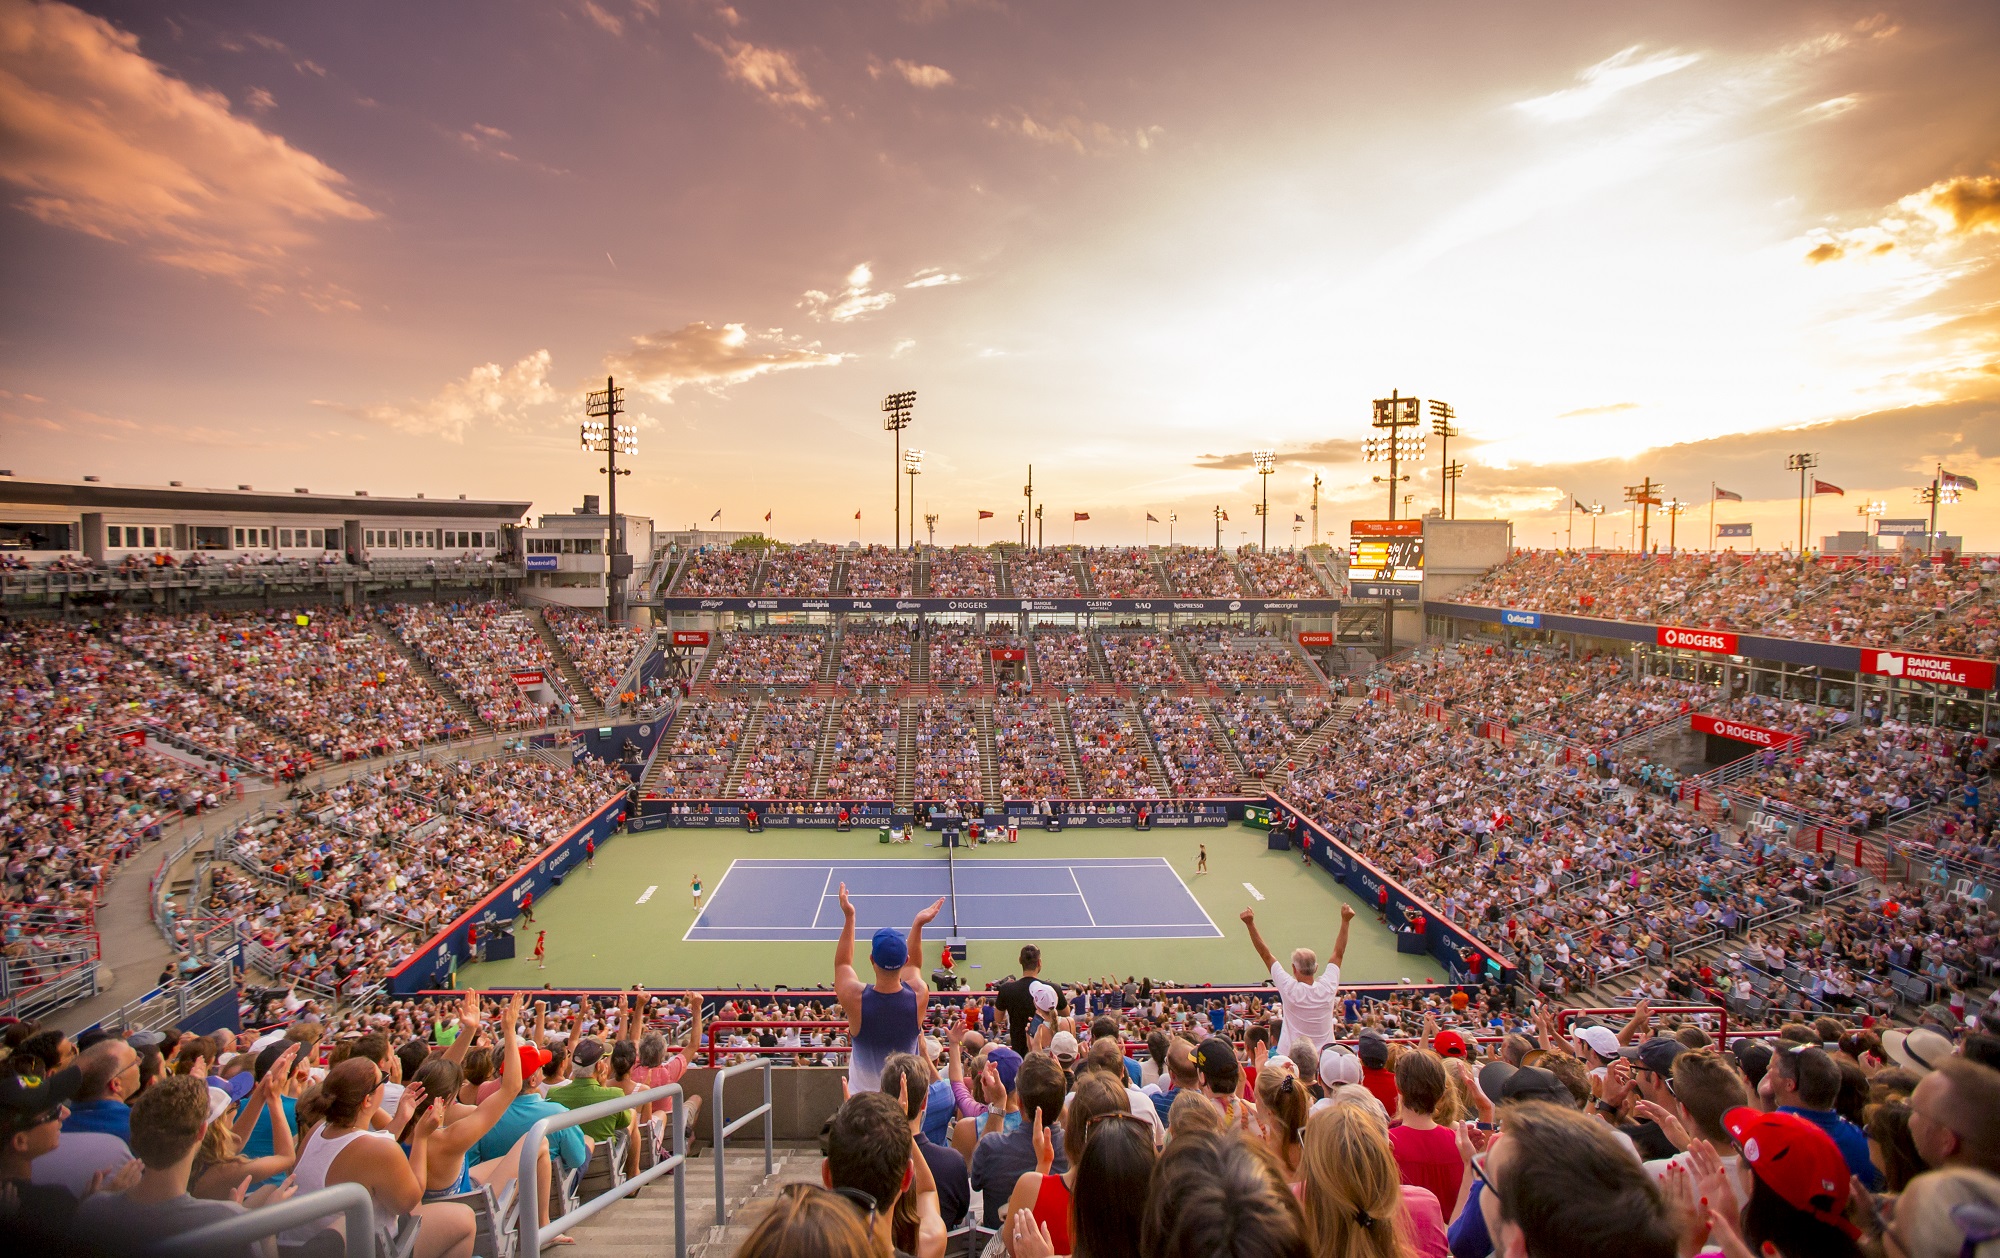 Tennis Canada announces the postponement of Rogers Cup presented by